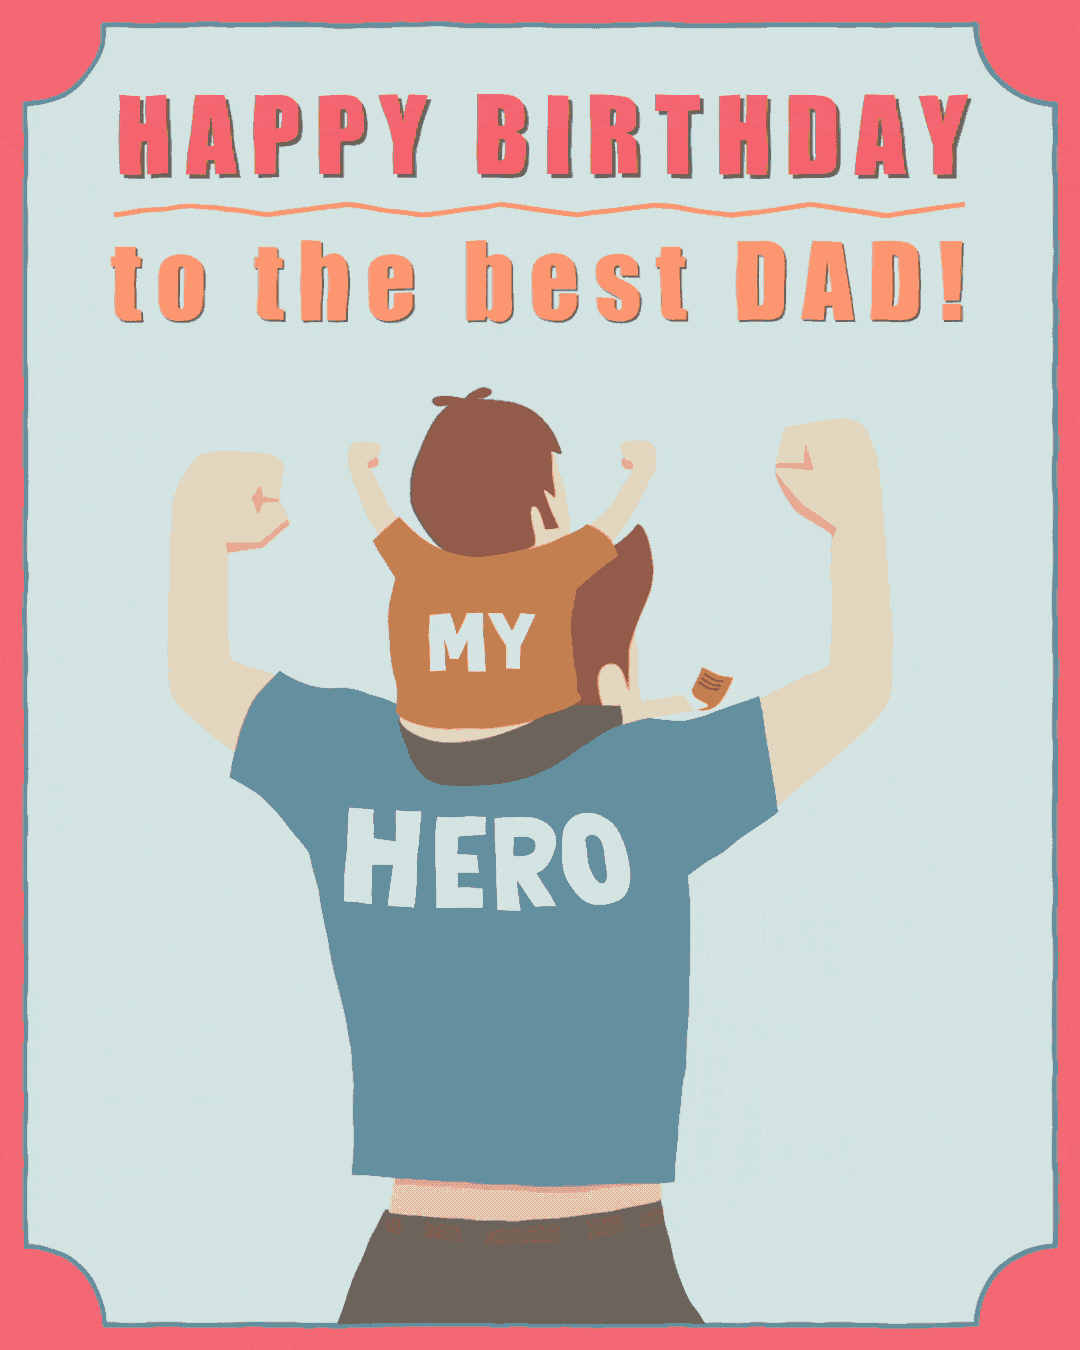 Free Happy Birthday Animated Images and GIFs for Father | Birthdayyou.com